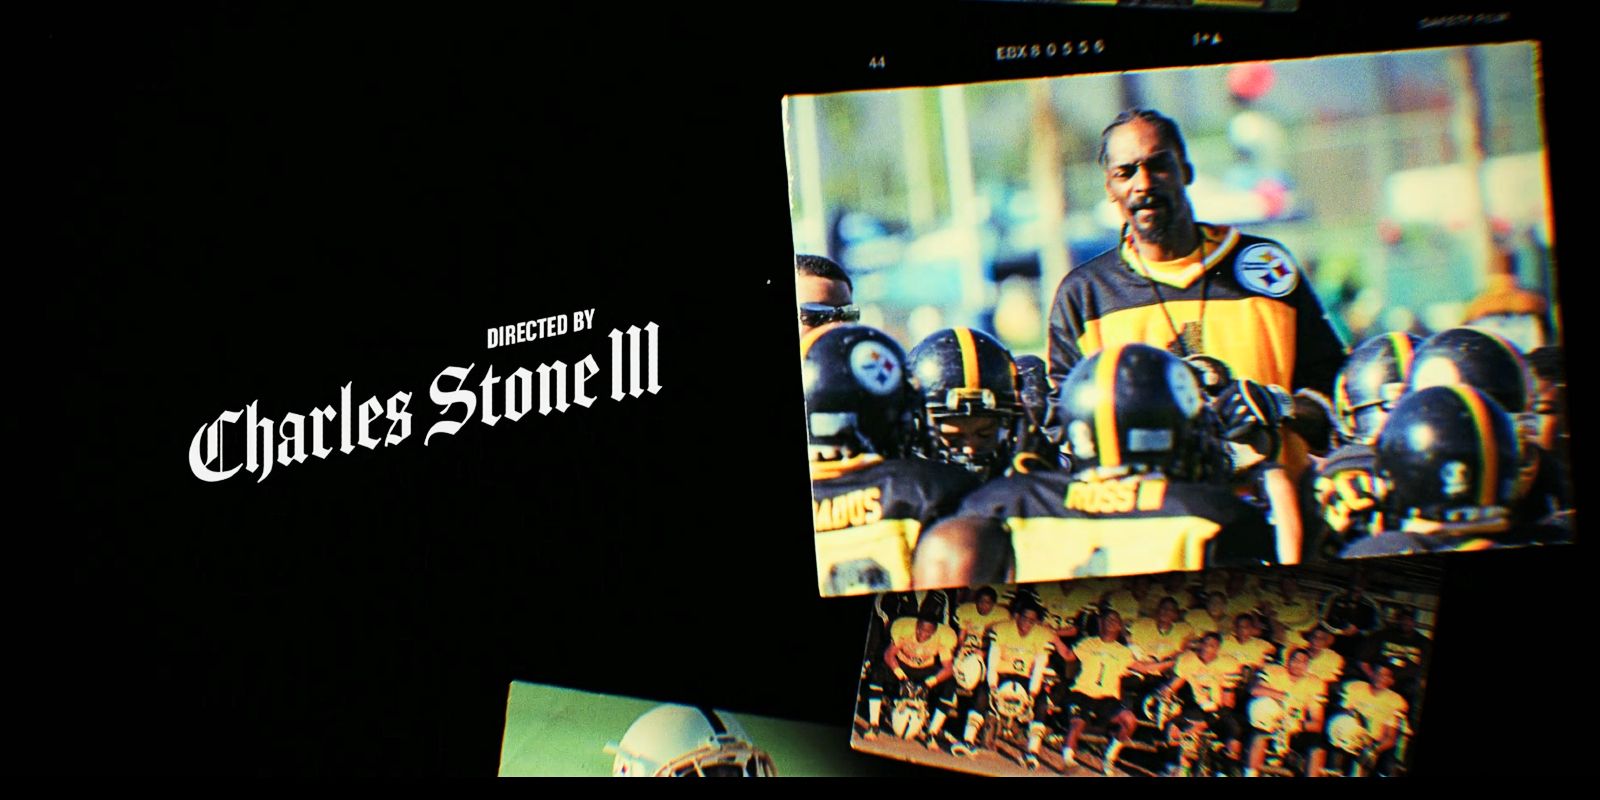 The end credits shows real-life photos of Snoop and his team the Steelers in The Underdoggs